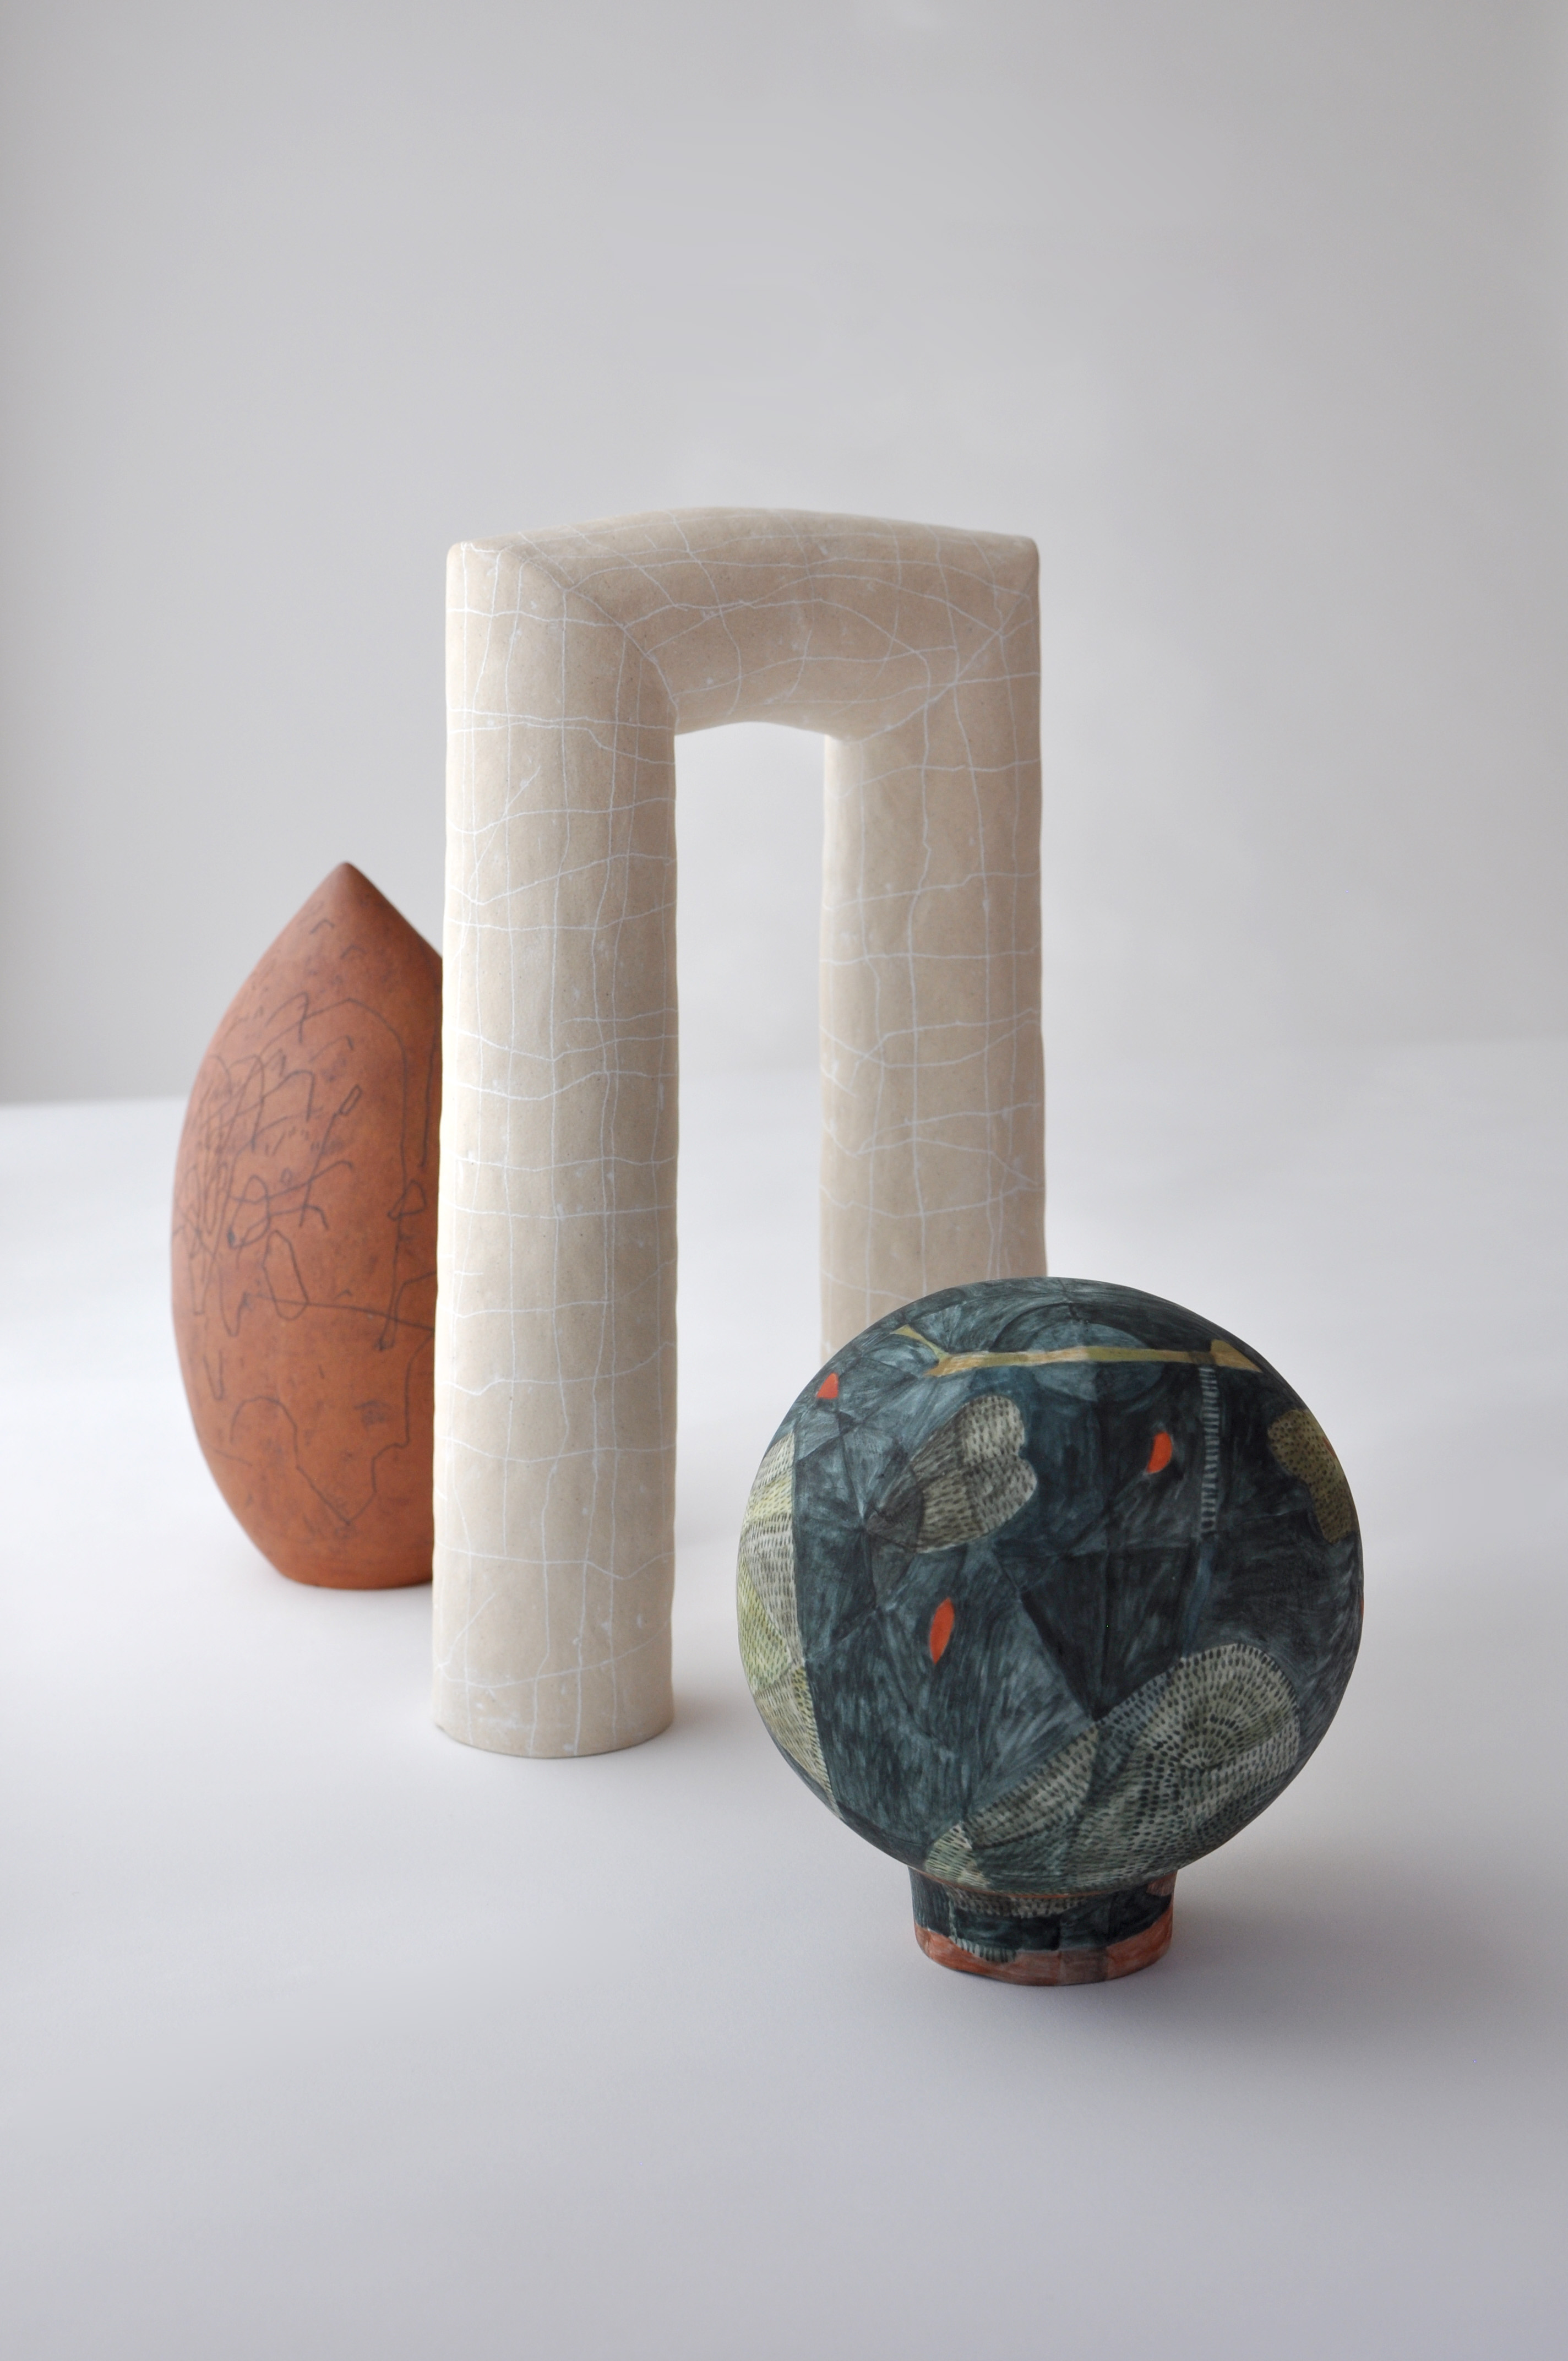 tania rollond_clay intersections group_2016